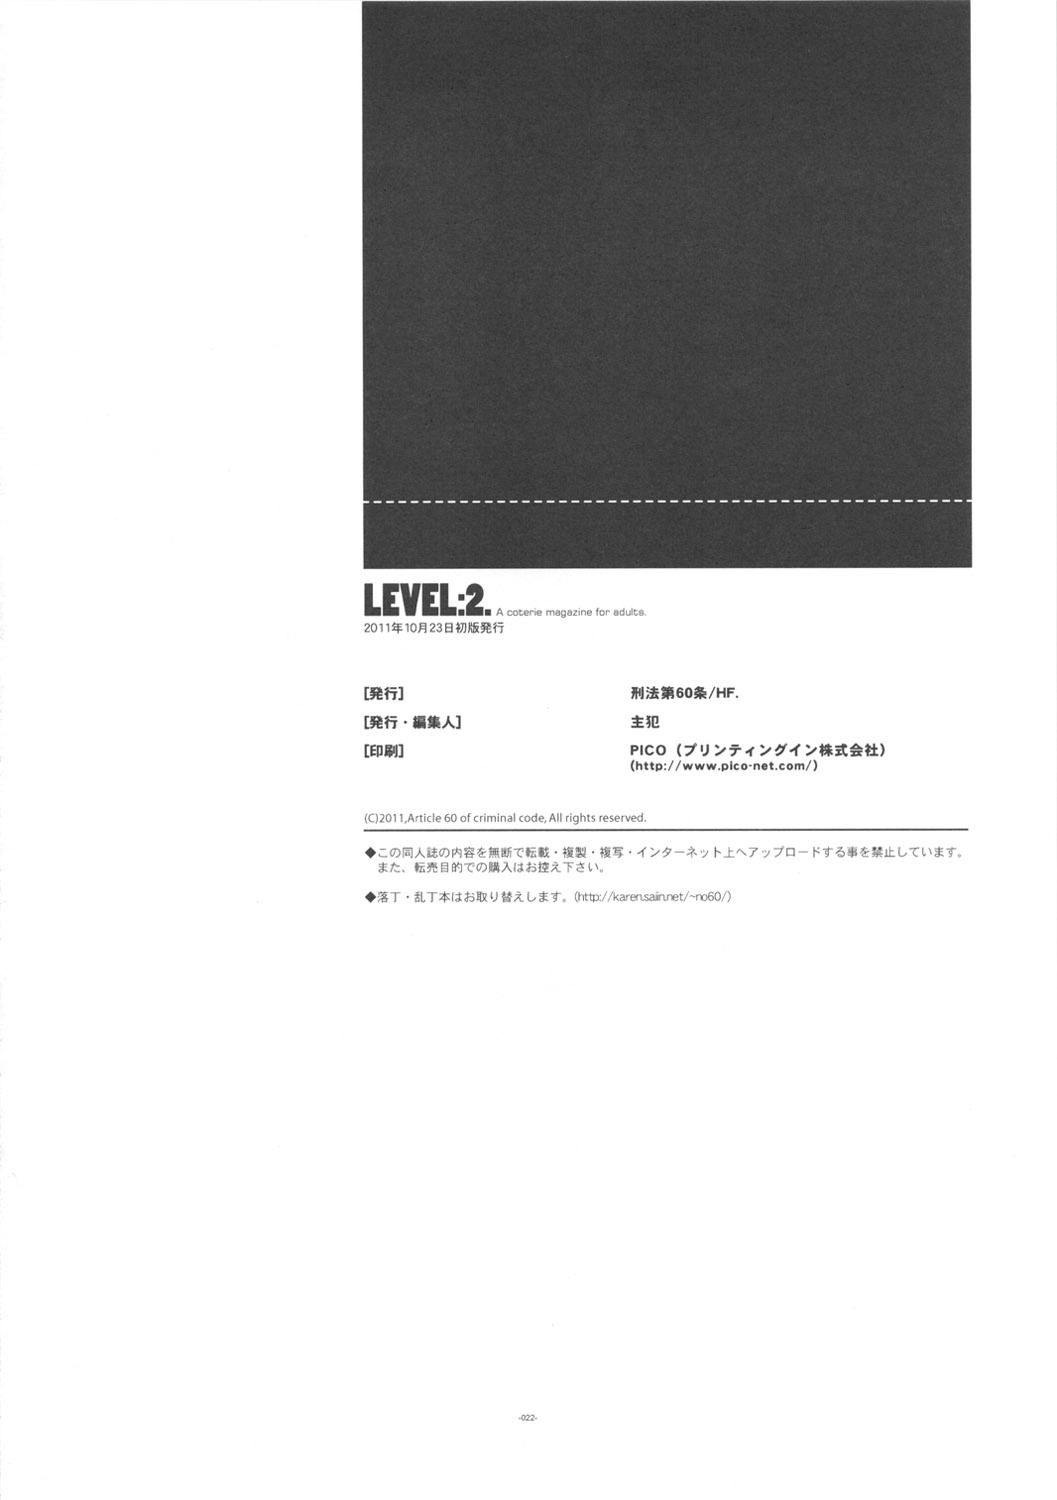 (SC53) [Article 60 of Criminal Code (Shuhan)] LEVEL:2. (Dragon Quest III) page 23 full